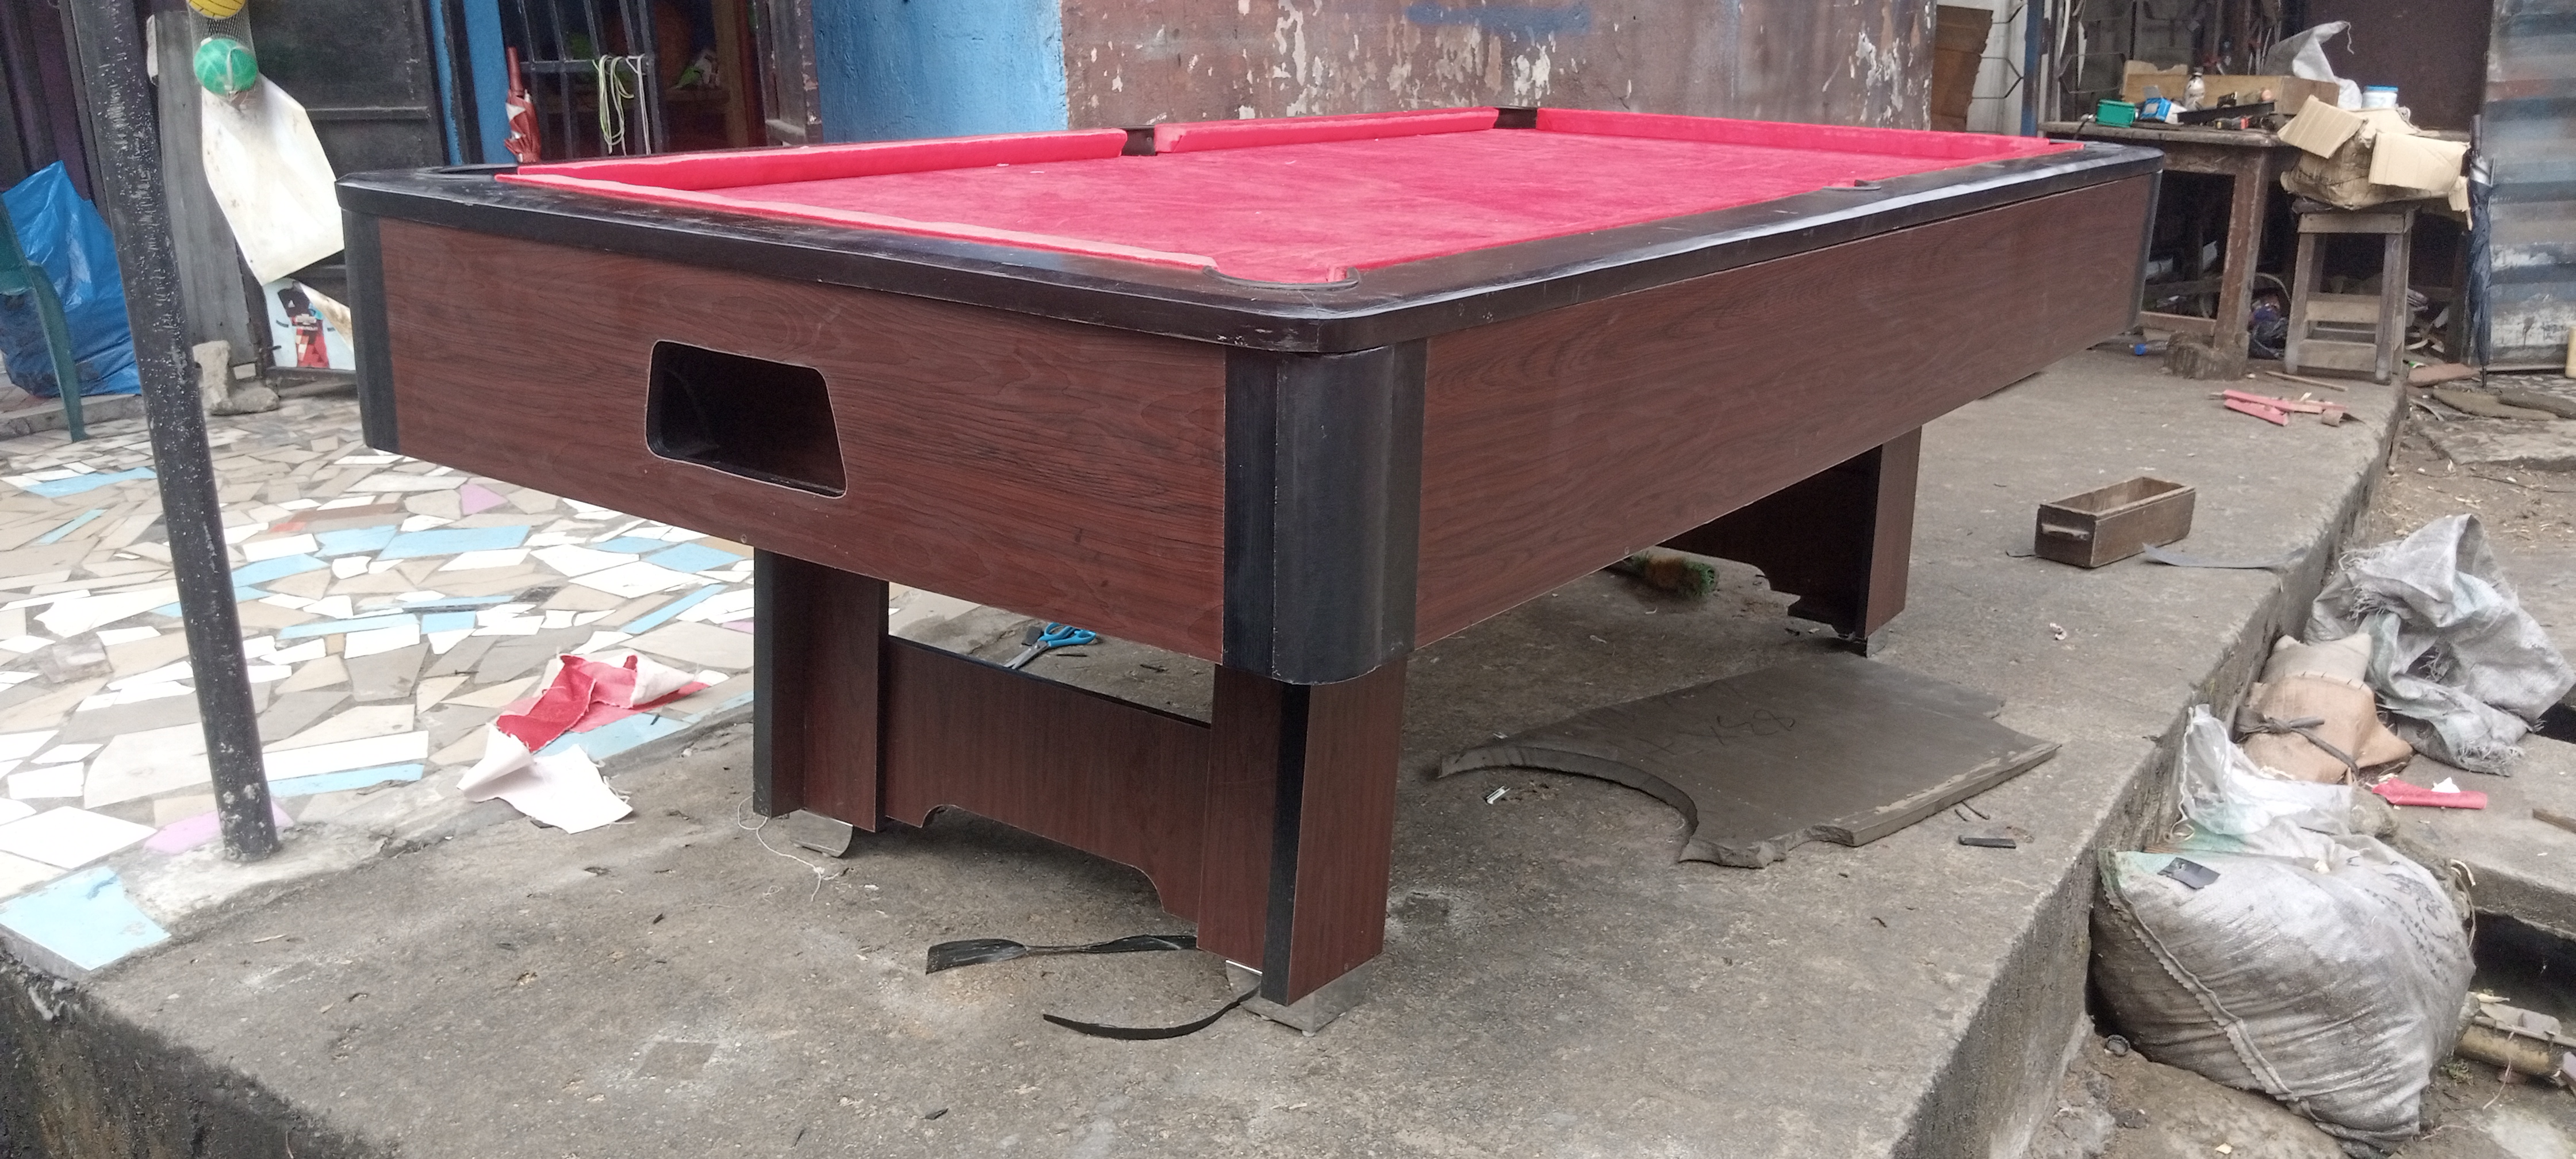 Nigerian Made Snooker Board is available at Efritin